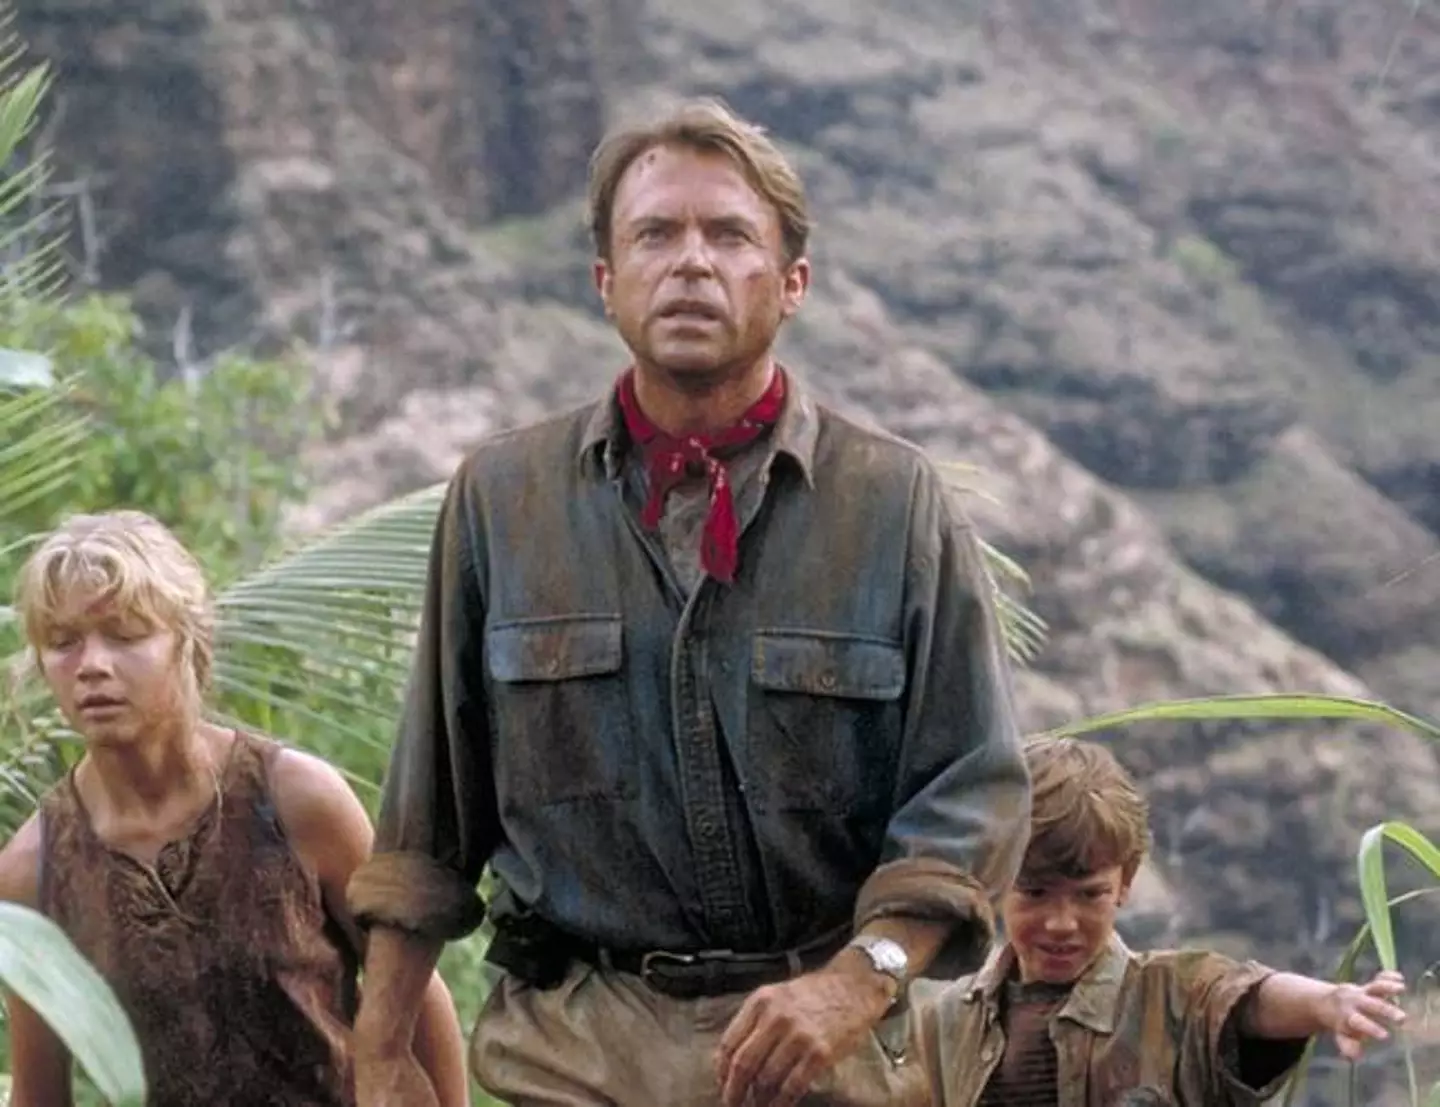 The actor is best known for his role in Jurassic Park. (Universal Pictures)